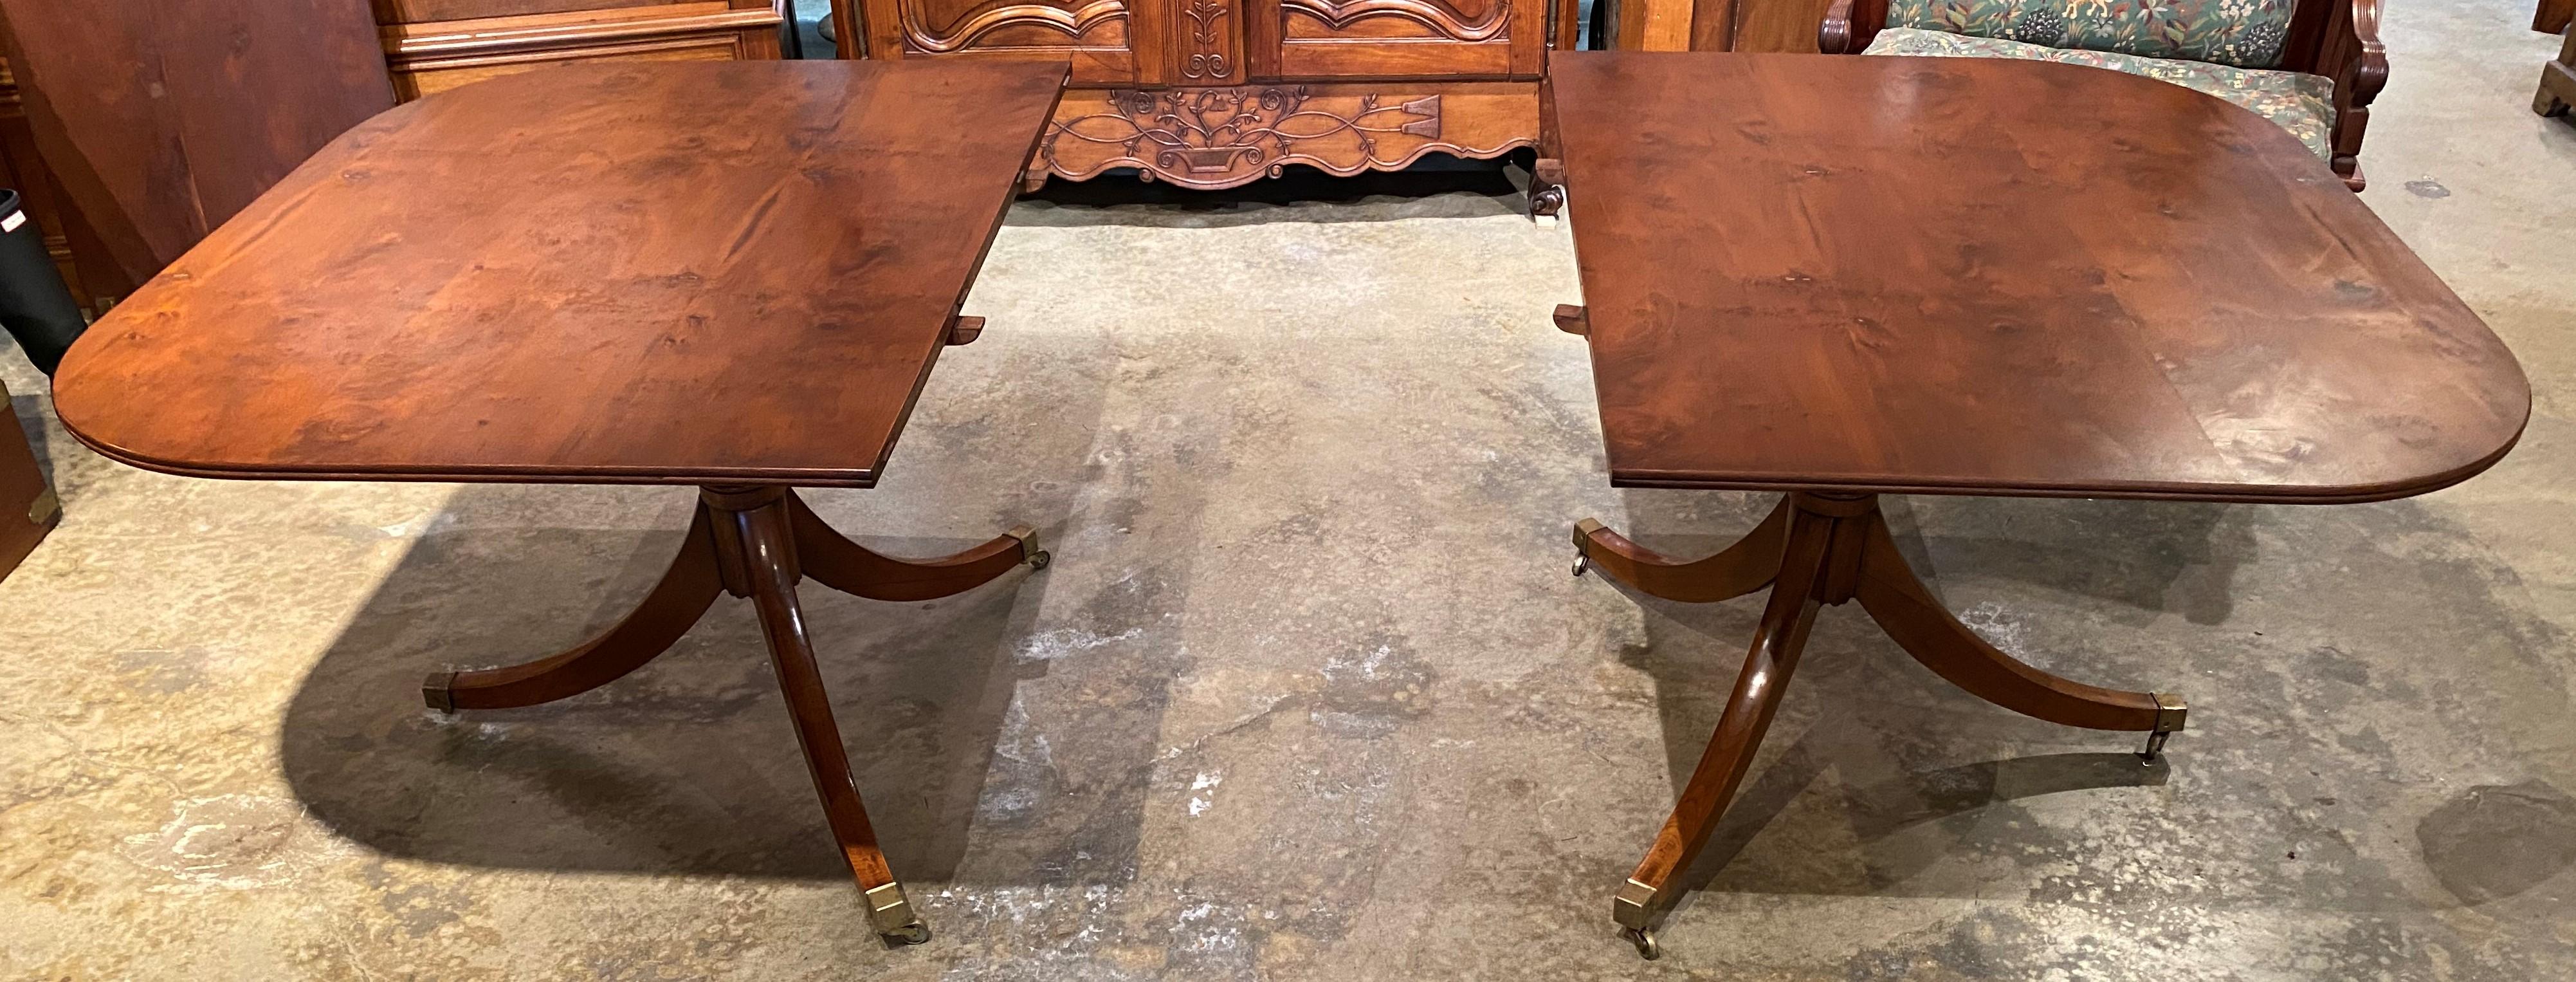 20th Century English Yew Wood Double Pedestal Dining Table with One Leaf 1